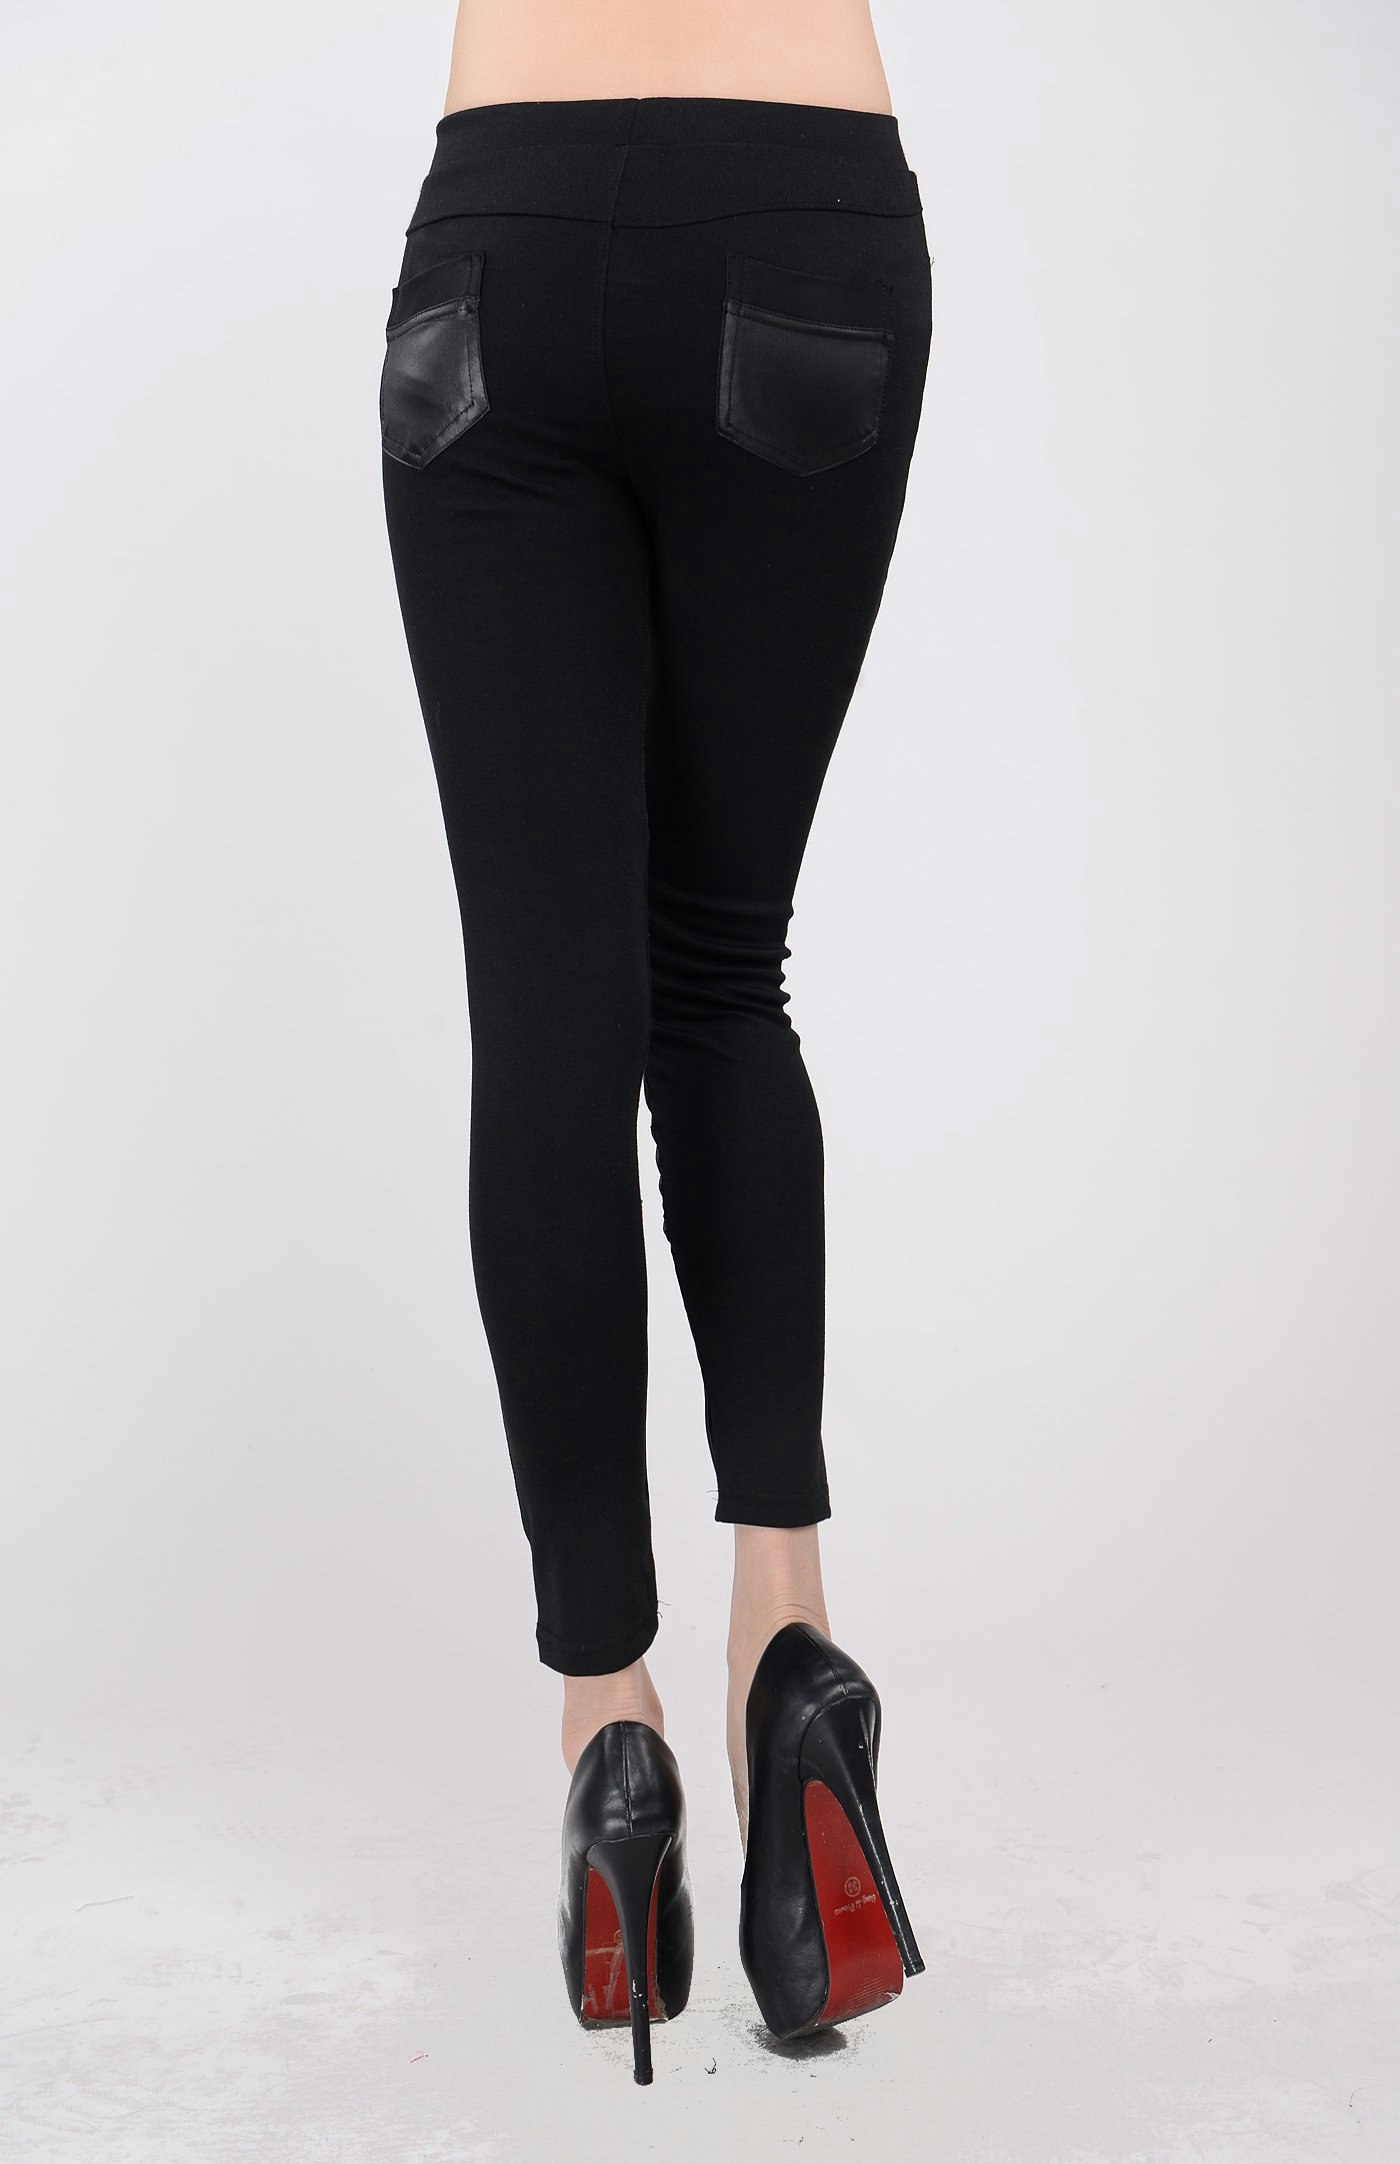 Black Faux Leggings With Rhinestone and Pockets